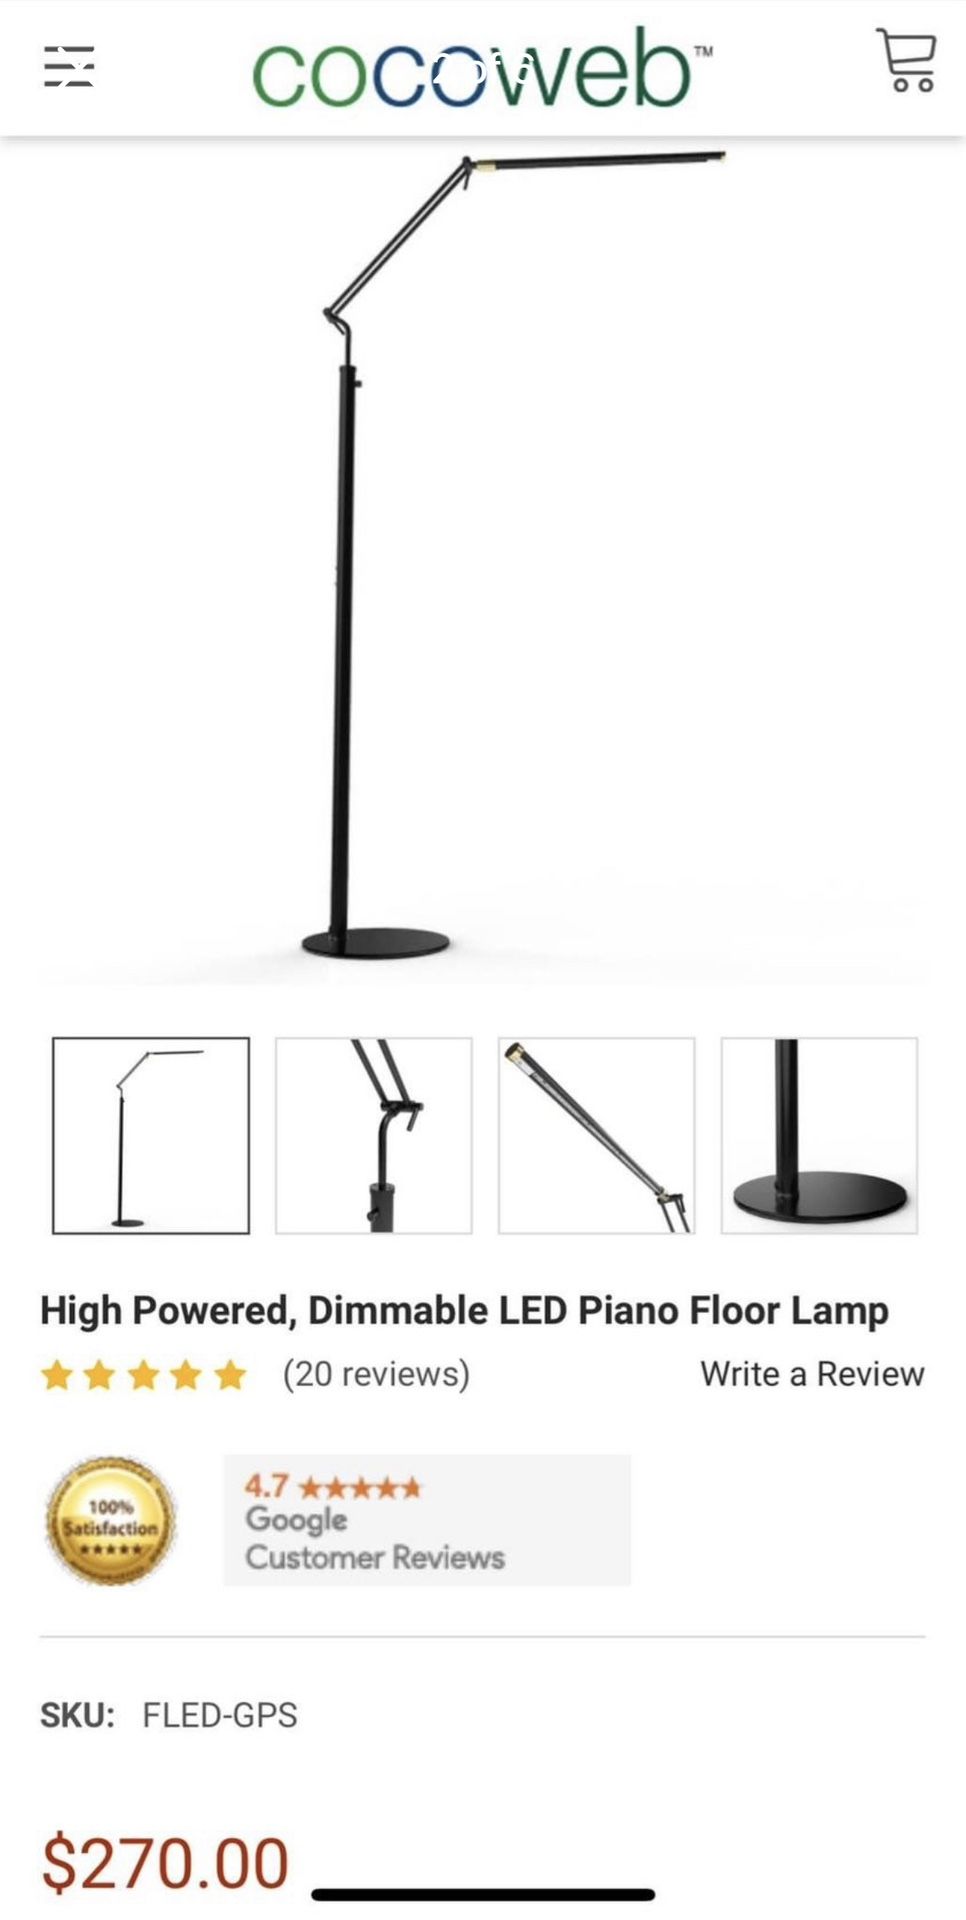 Cocoweb High Powered Dimmable LED Floor Lamp for Sale in Queen Creek, AZ  OfferUp